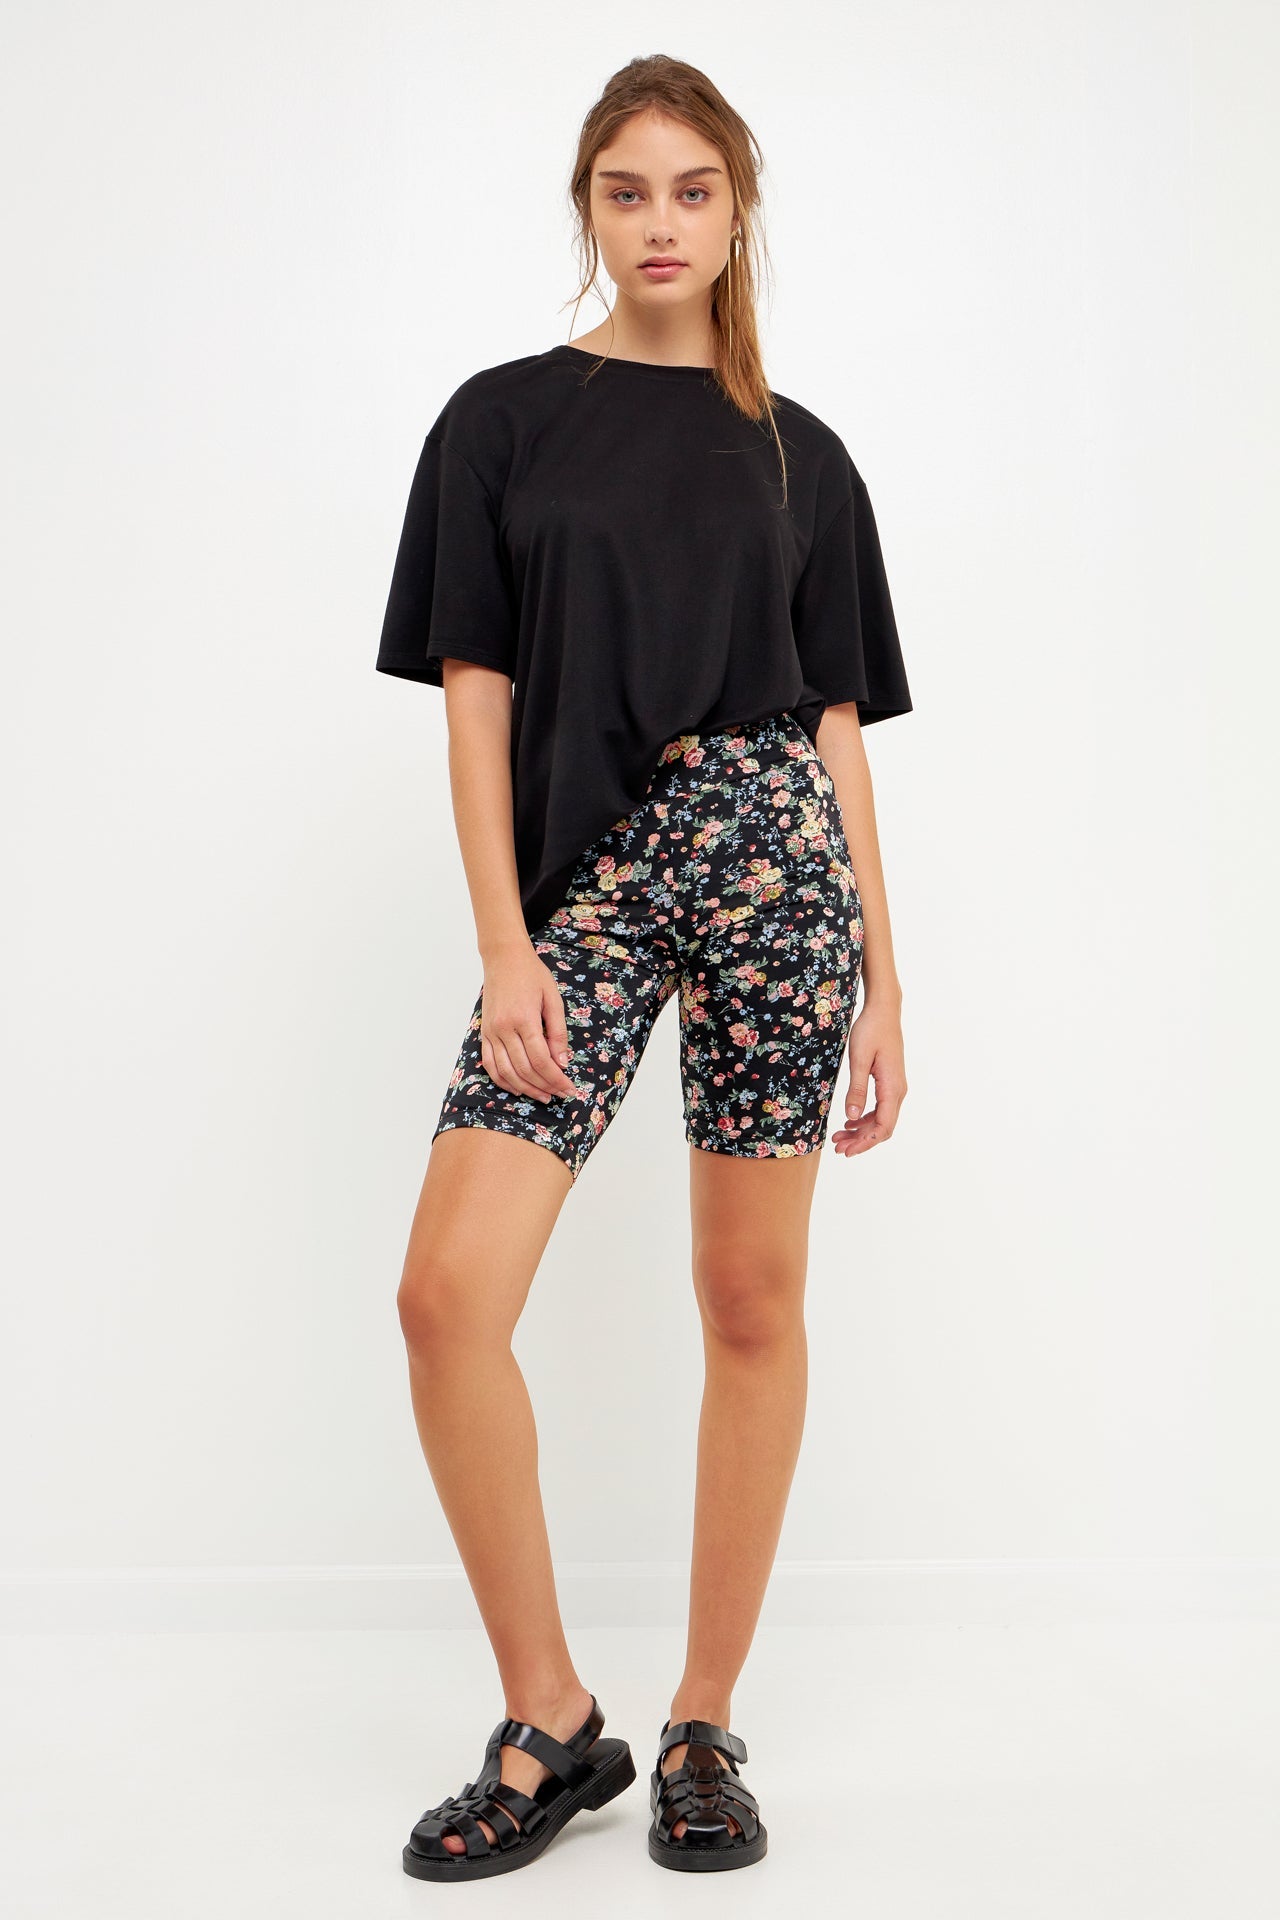 GREY LAB-Floral Print Bike Shorts-LOUNGE WEAR available at Objectrare